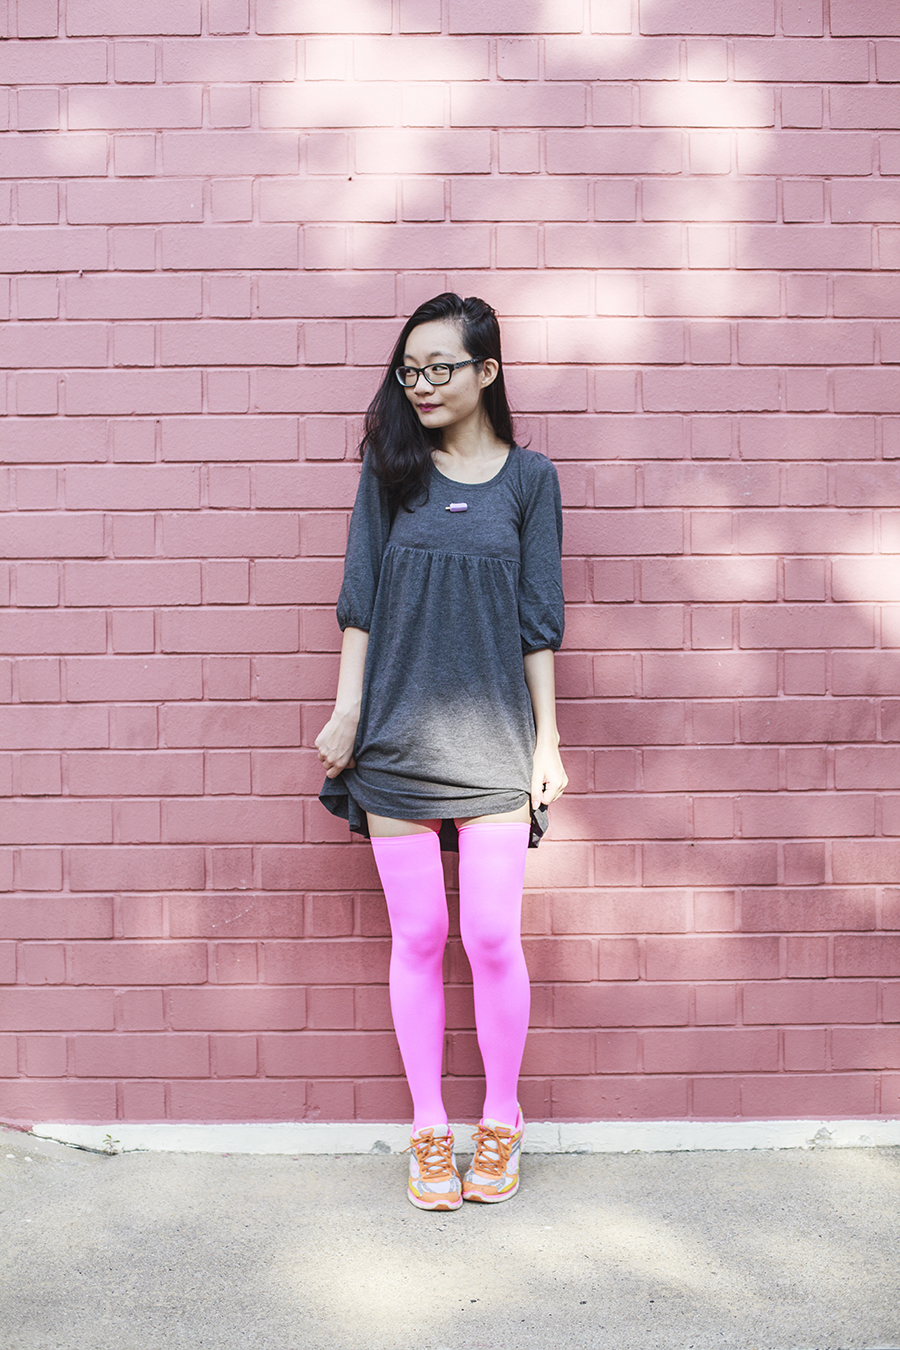 We Love Colors Outfit: We Love Colors neon pink thigh high stockings, Skechers neon sneakers, Forever 21 grey babydoll dress,  old school potong ice cream pin, Gap black rimmed glasses.